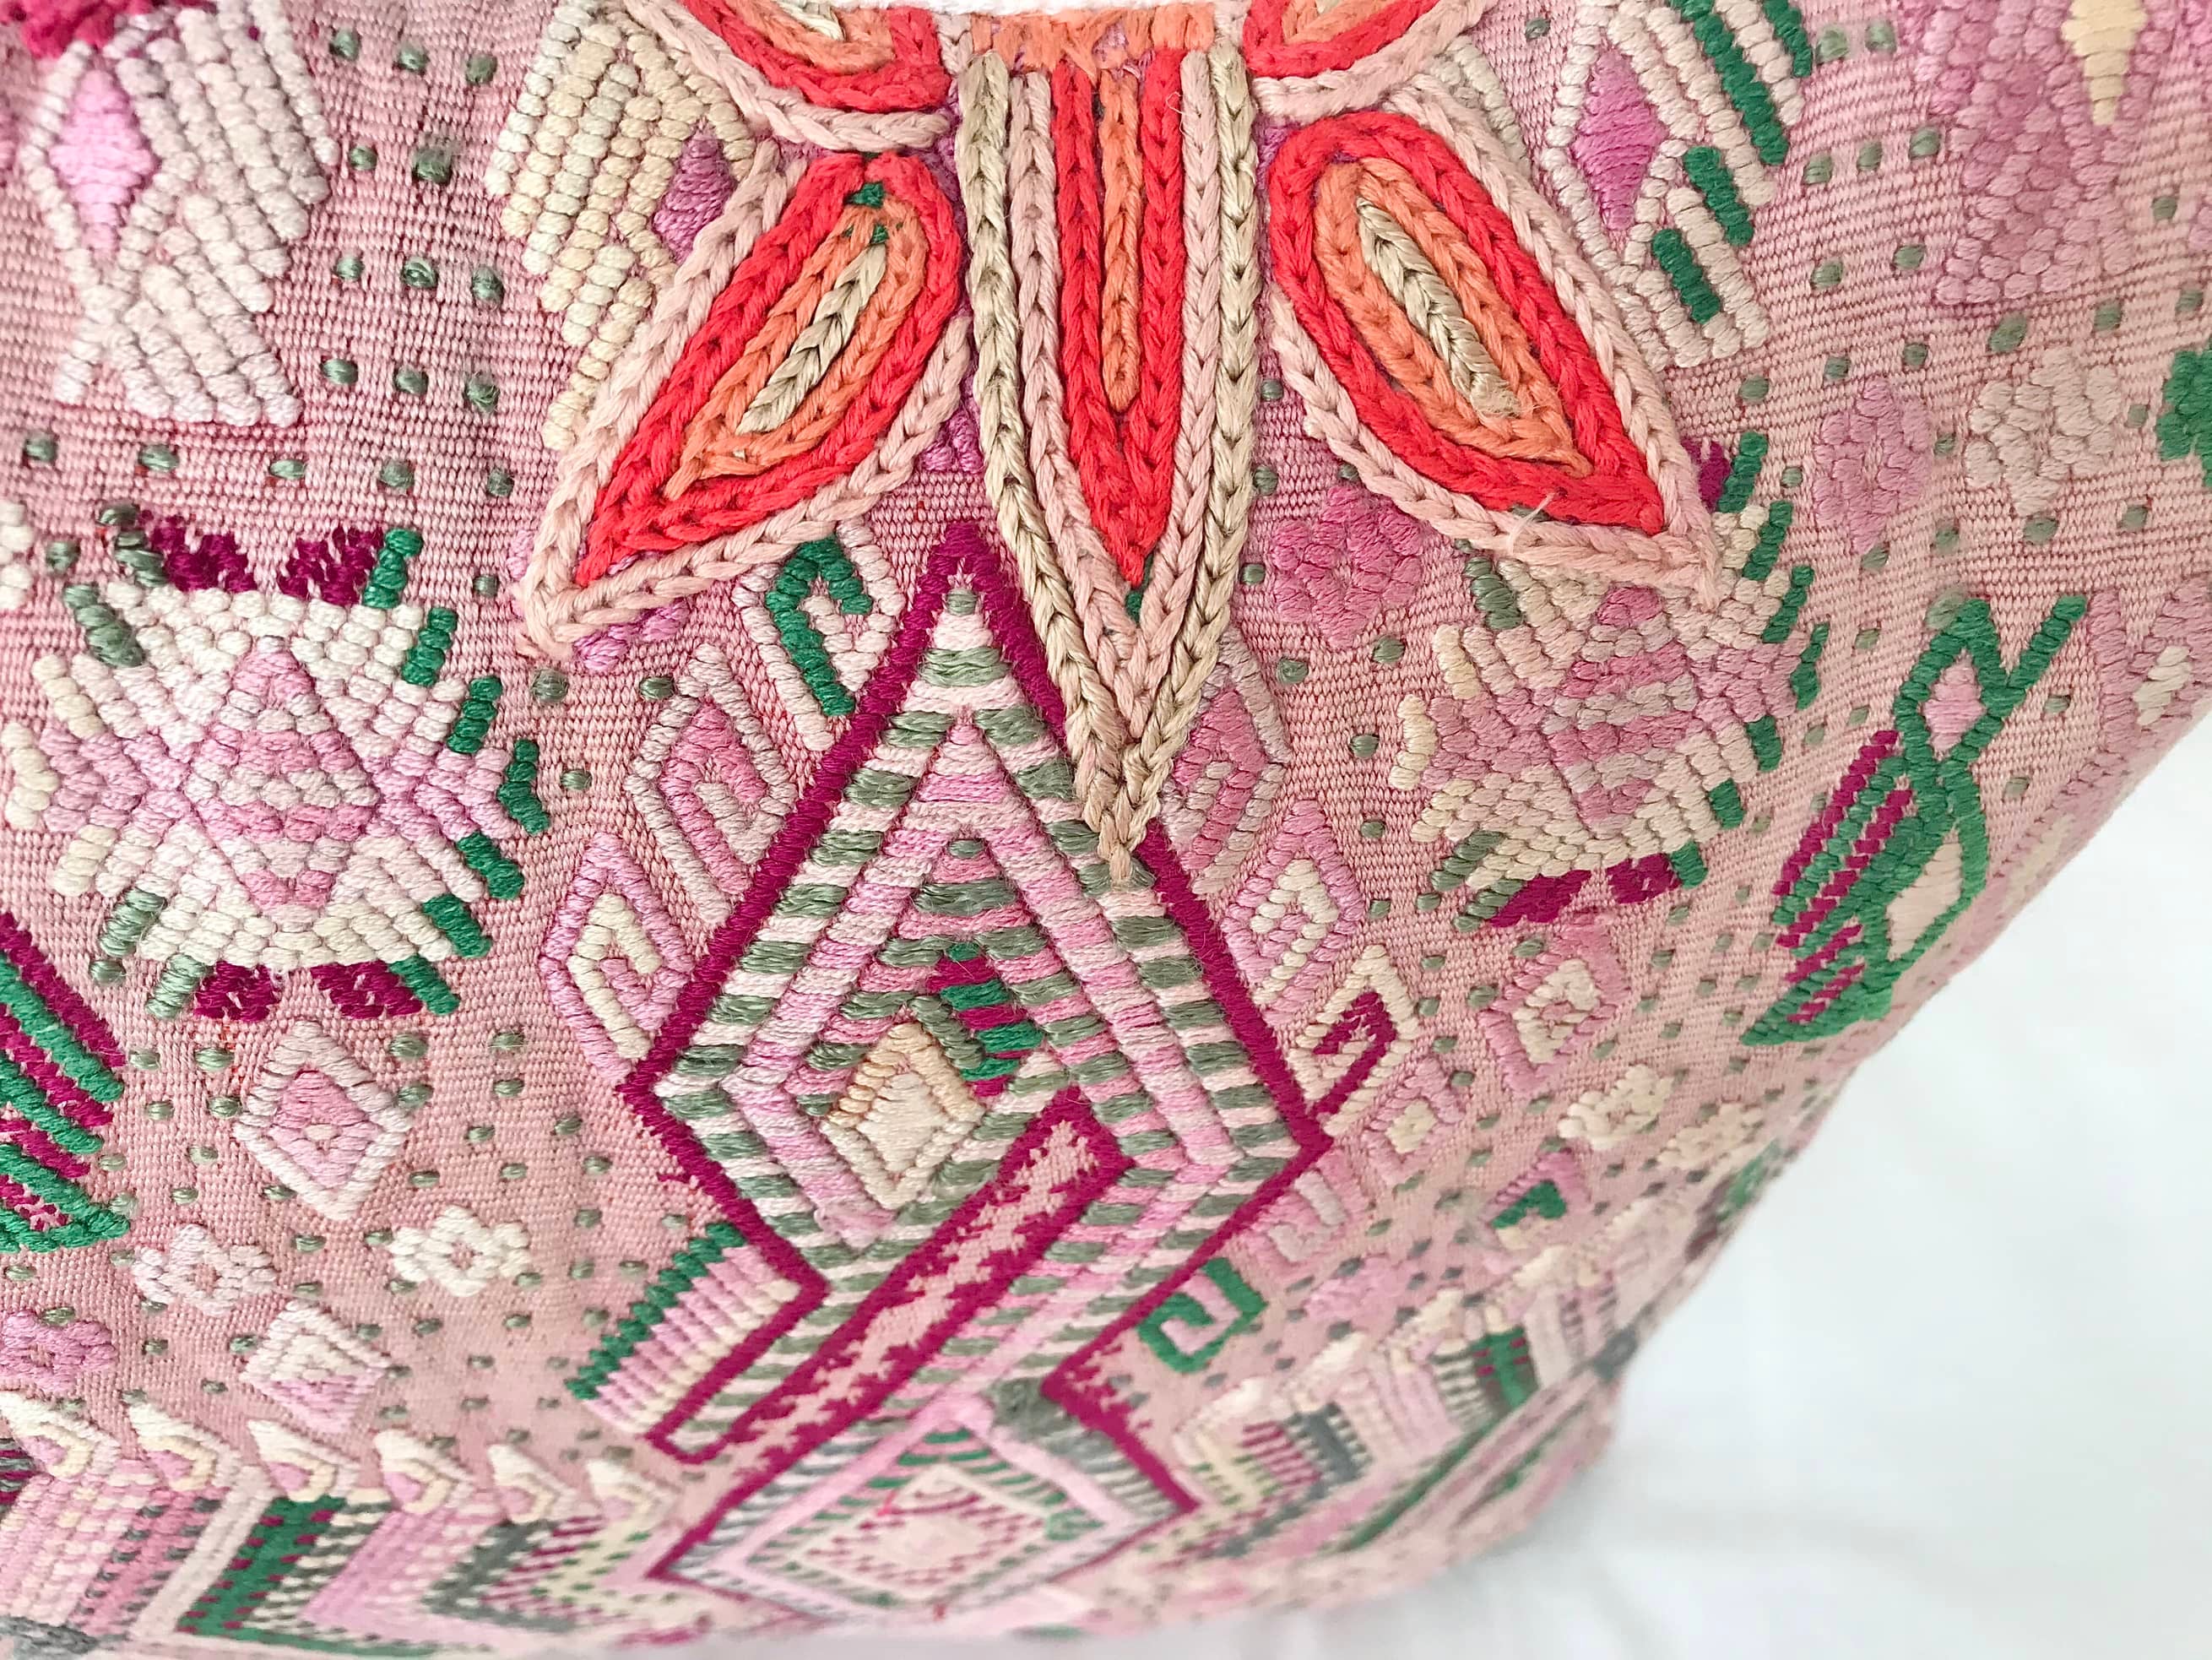 Guatemalan Huipil Pillow, vintage, hand embroidered textile of stylised birds in pink and green in a shabby chic design